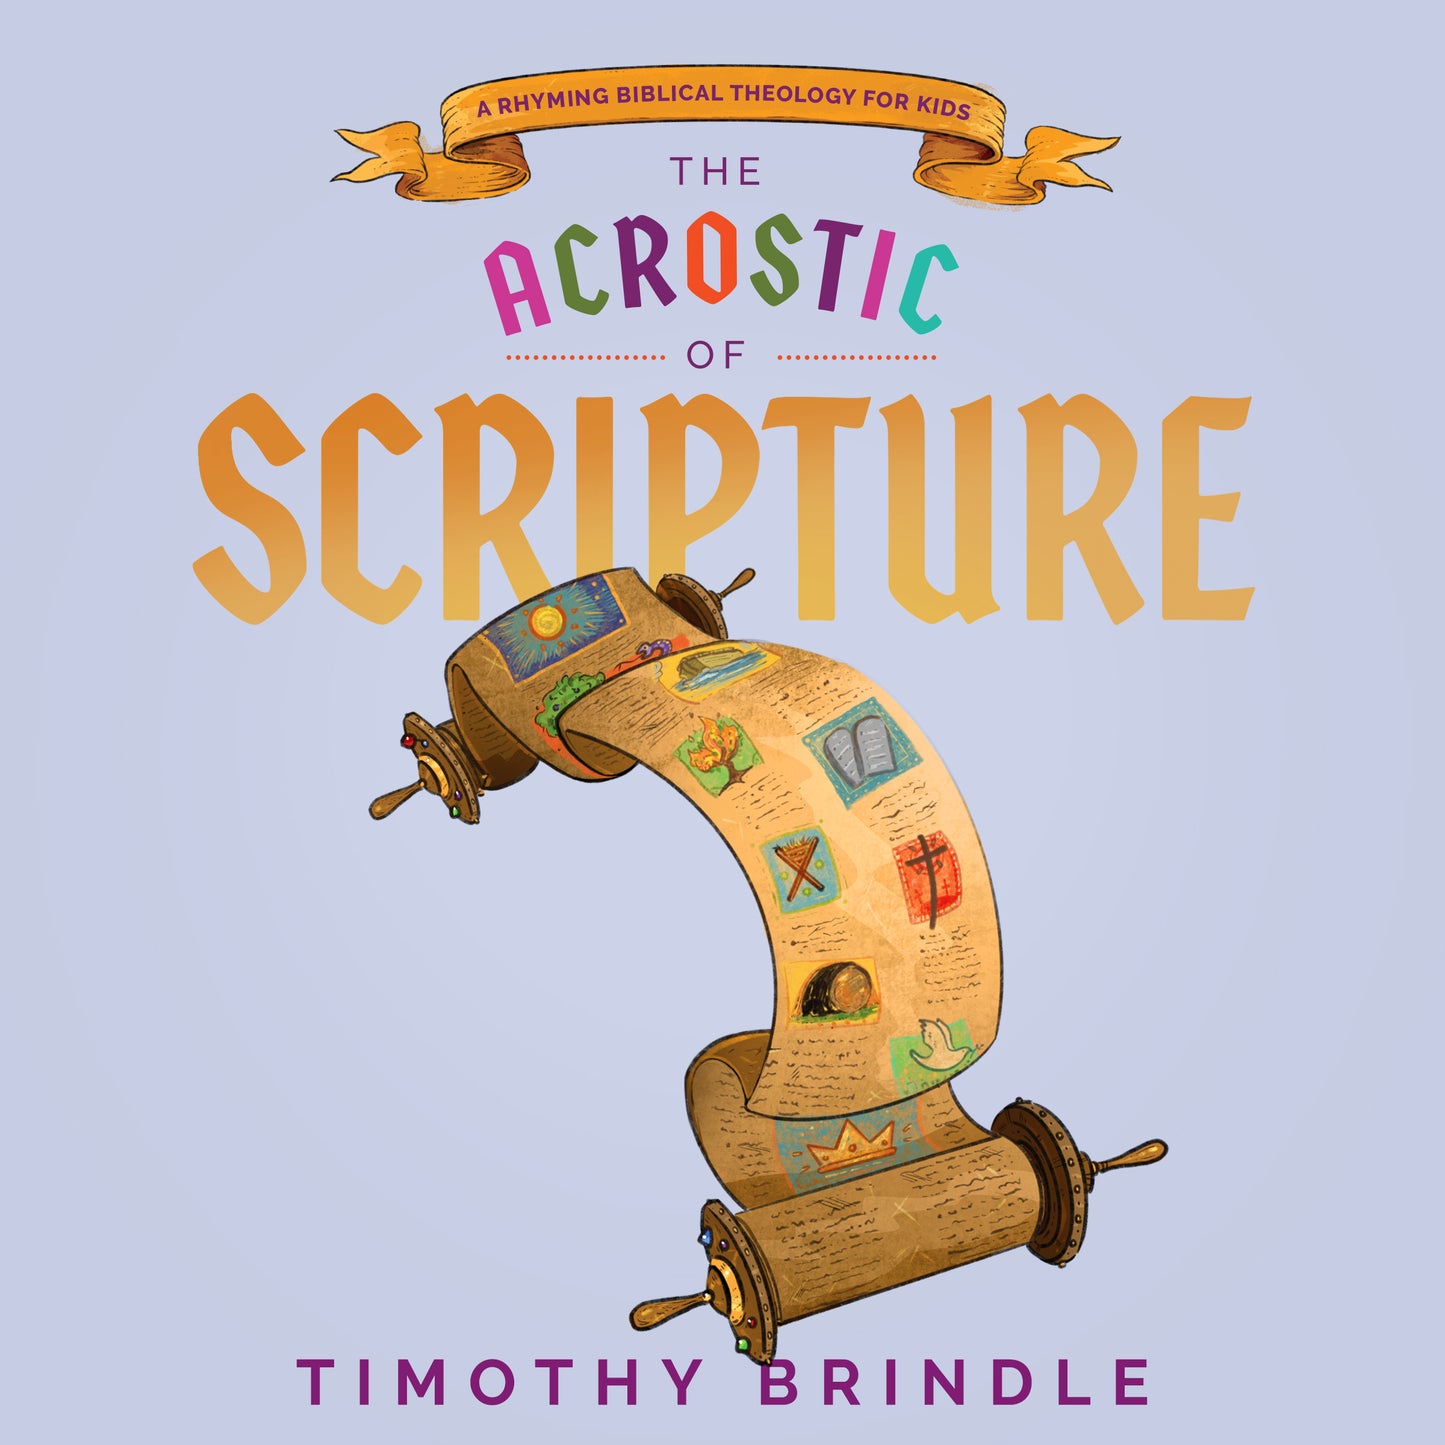 The Acrostic of Scripture: A Rhyming Biblical Theology for Kids (Digital Album)